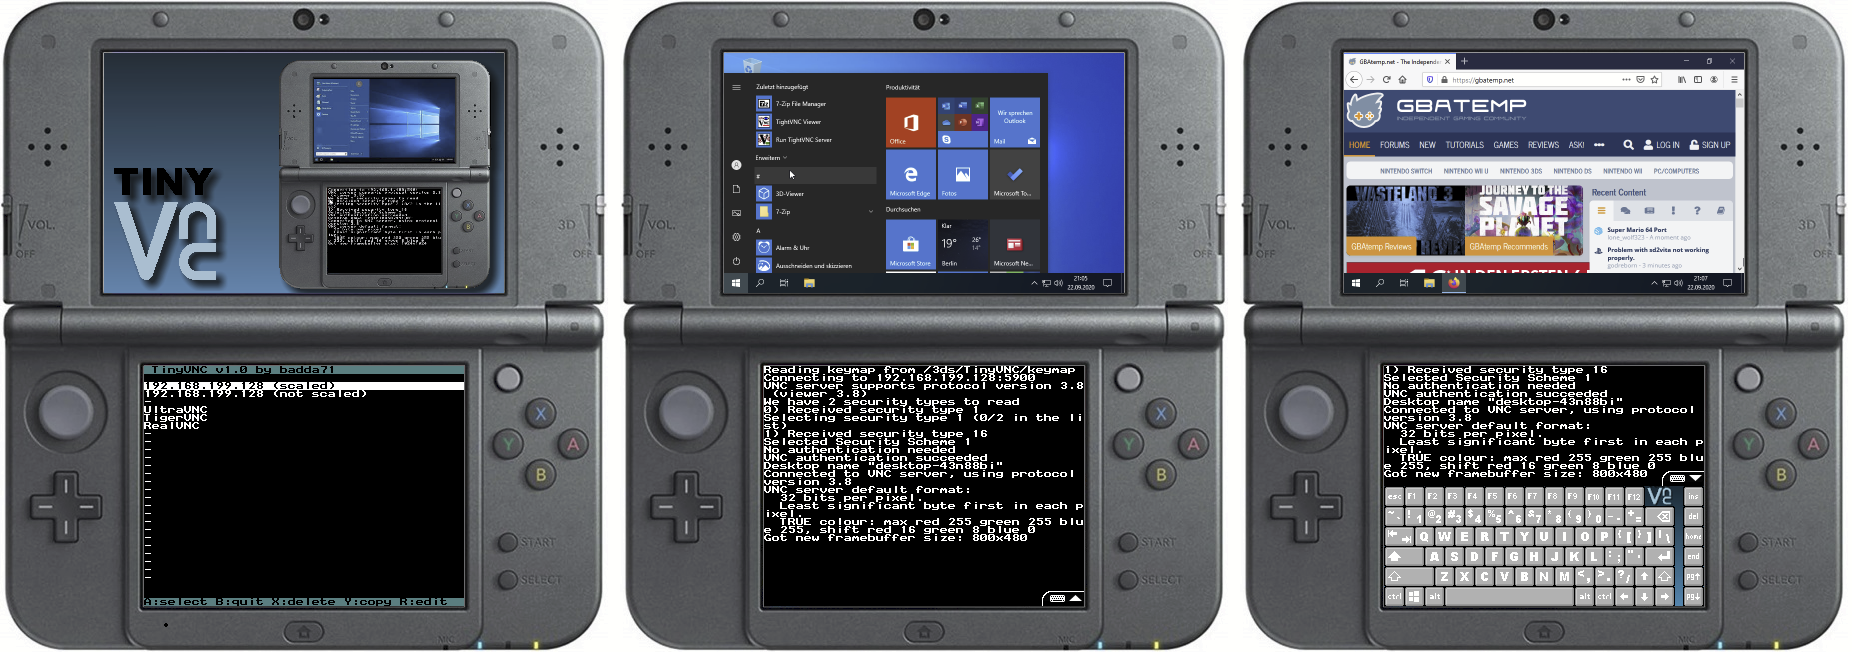 Release Tinyvnc Vnc Viewer For Nintendo 3ds Gbatemp Net The Independent Video Game Community